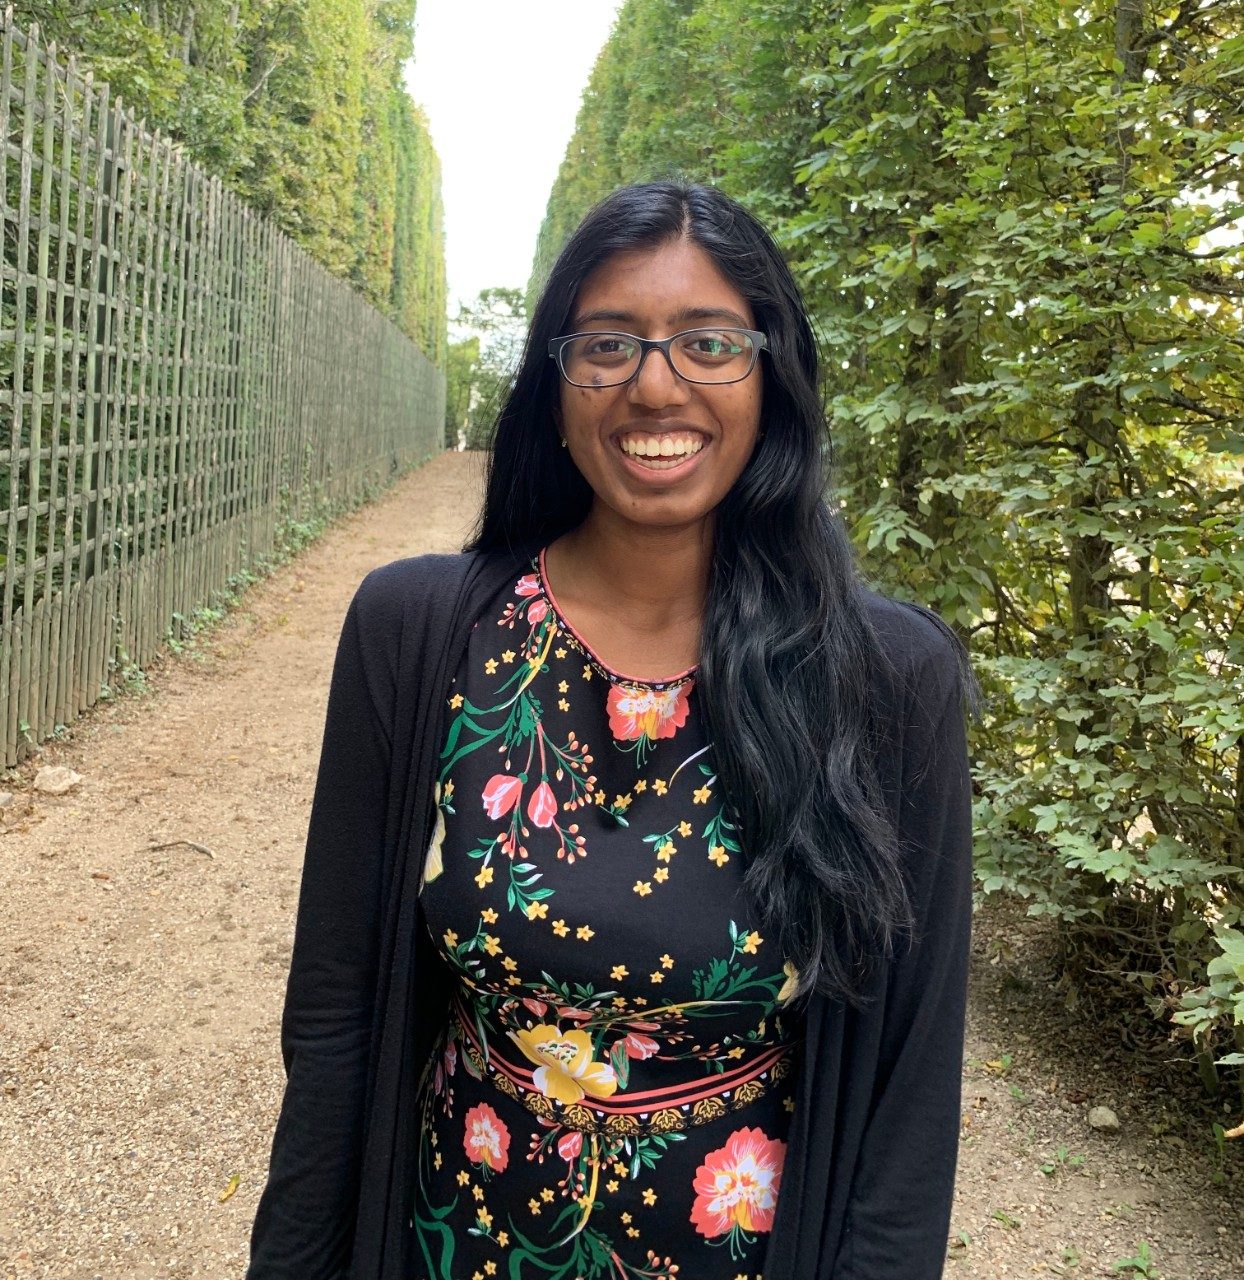 Meghna smiling center frame in front of a row of green trees